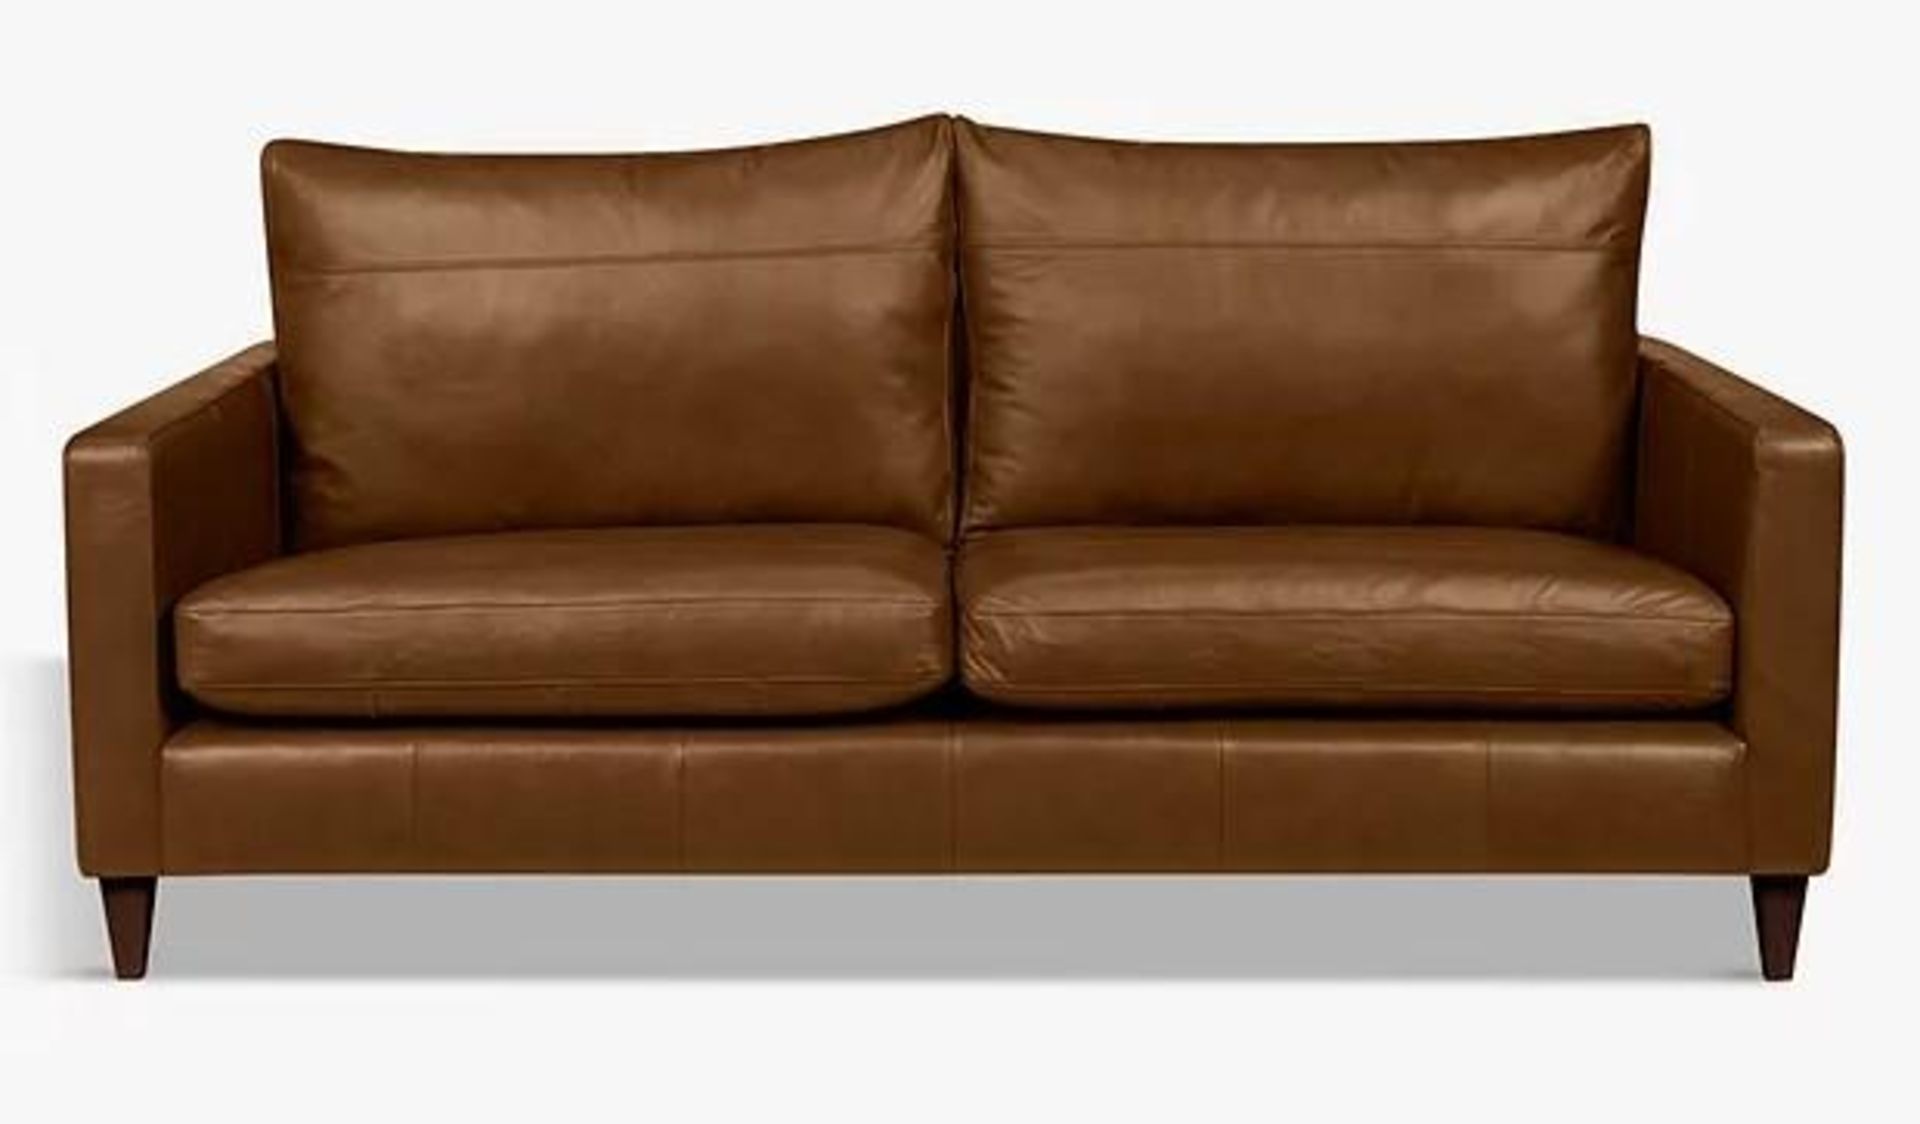 BRAND NEW John Lewis Bailey full leather 2 seater sofa in Tan. RRP: £1,599.00 - Image 2 of 4